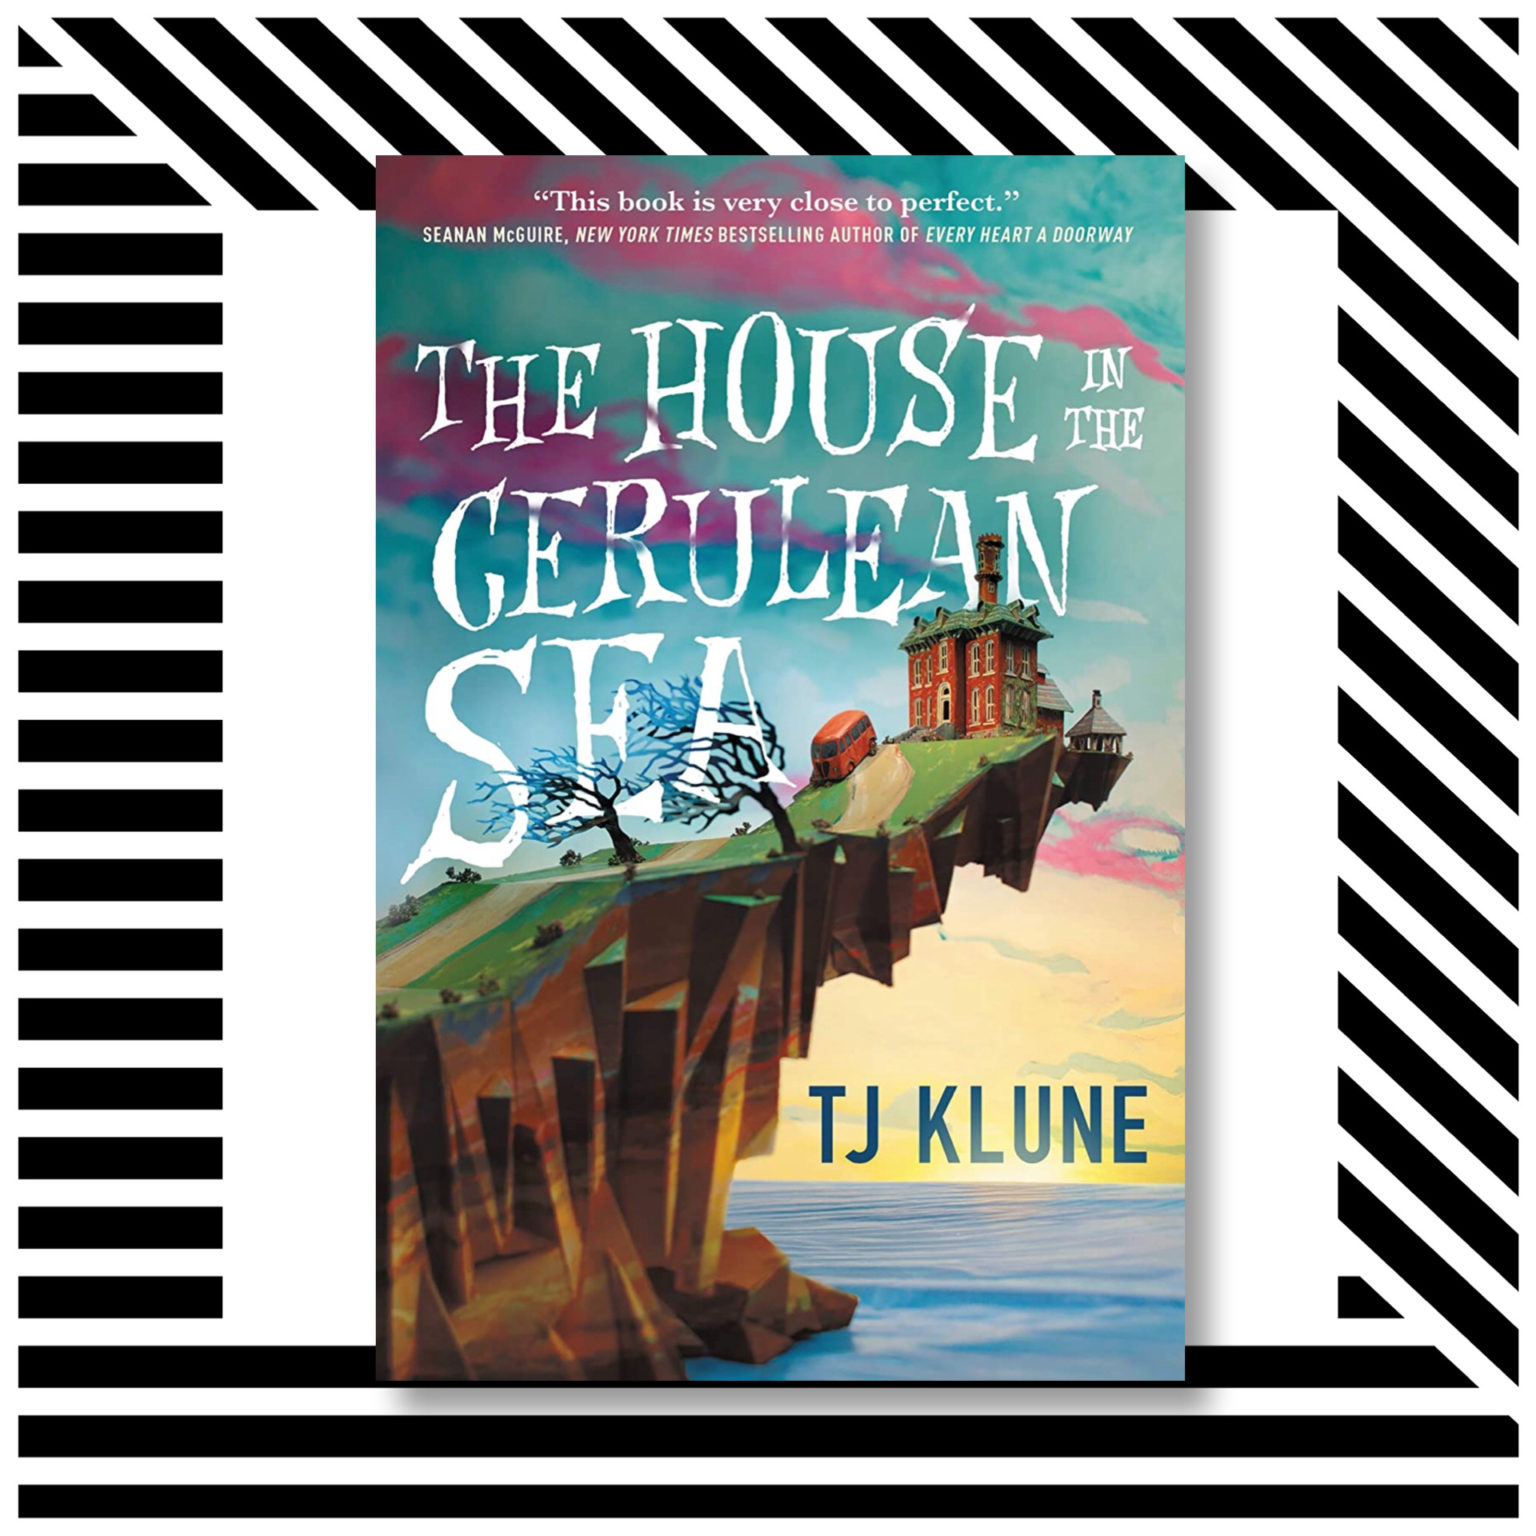 book review house in the cerulean sea